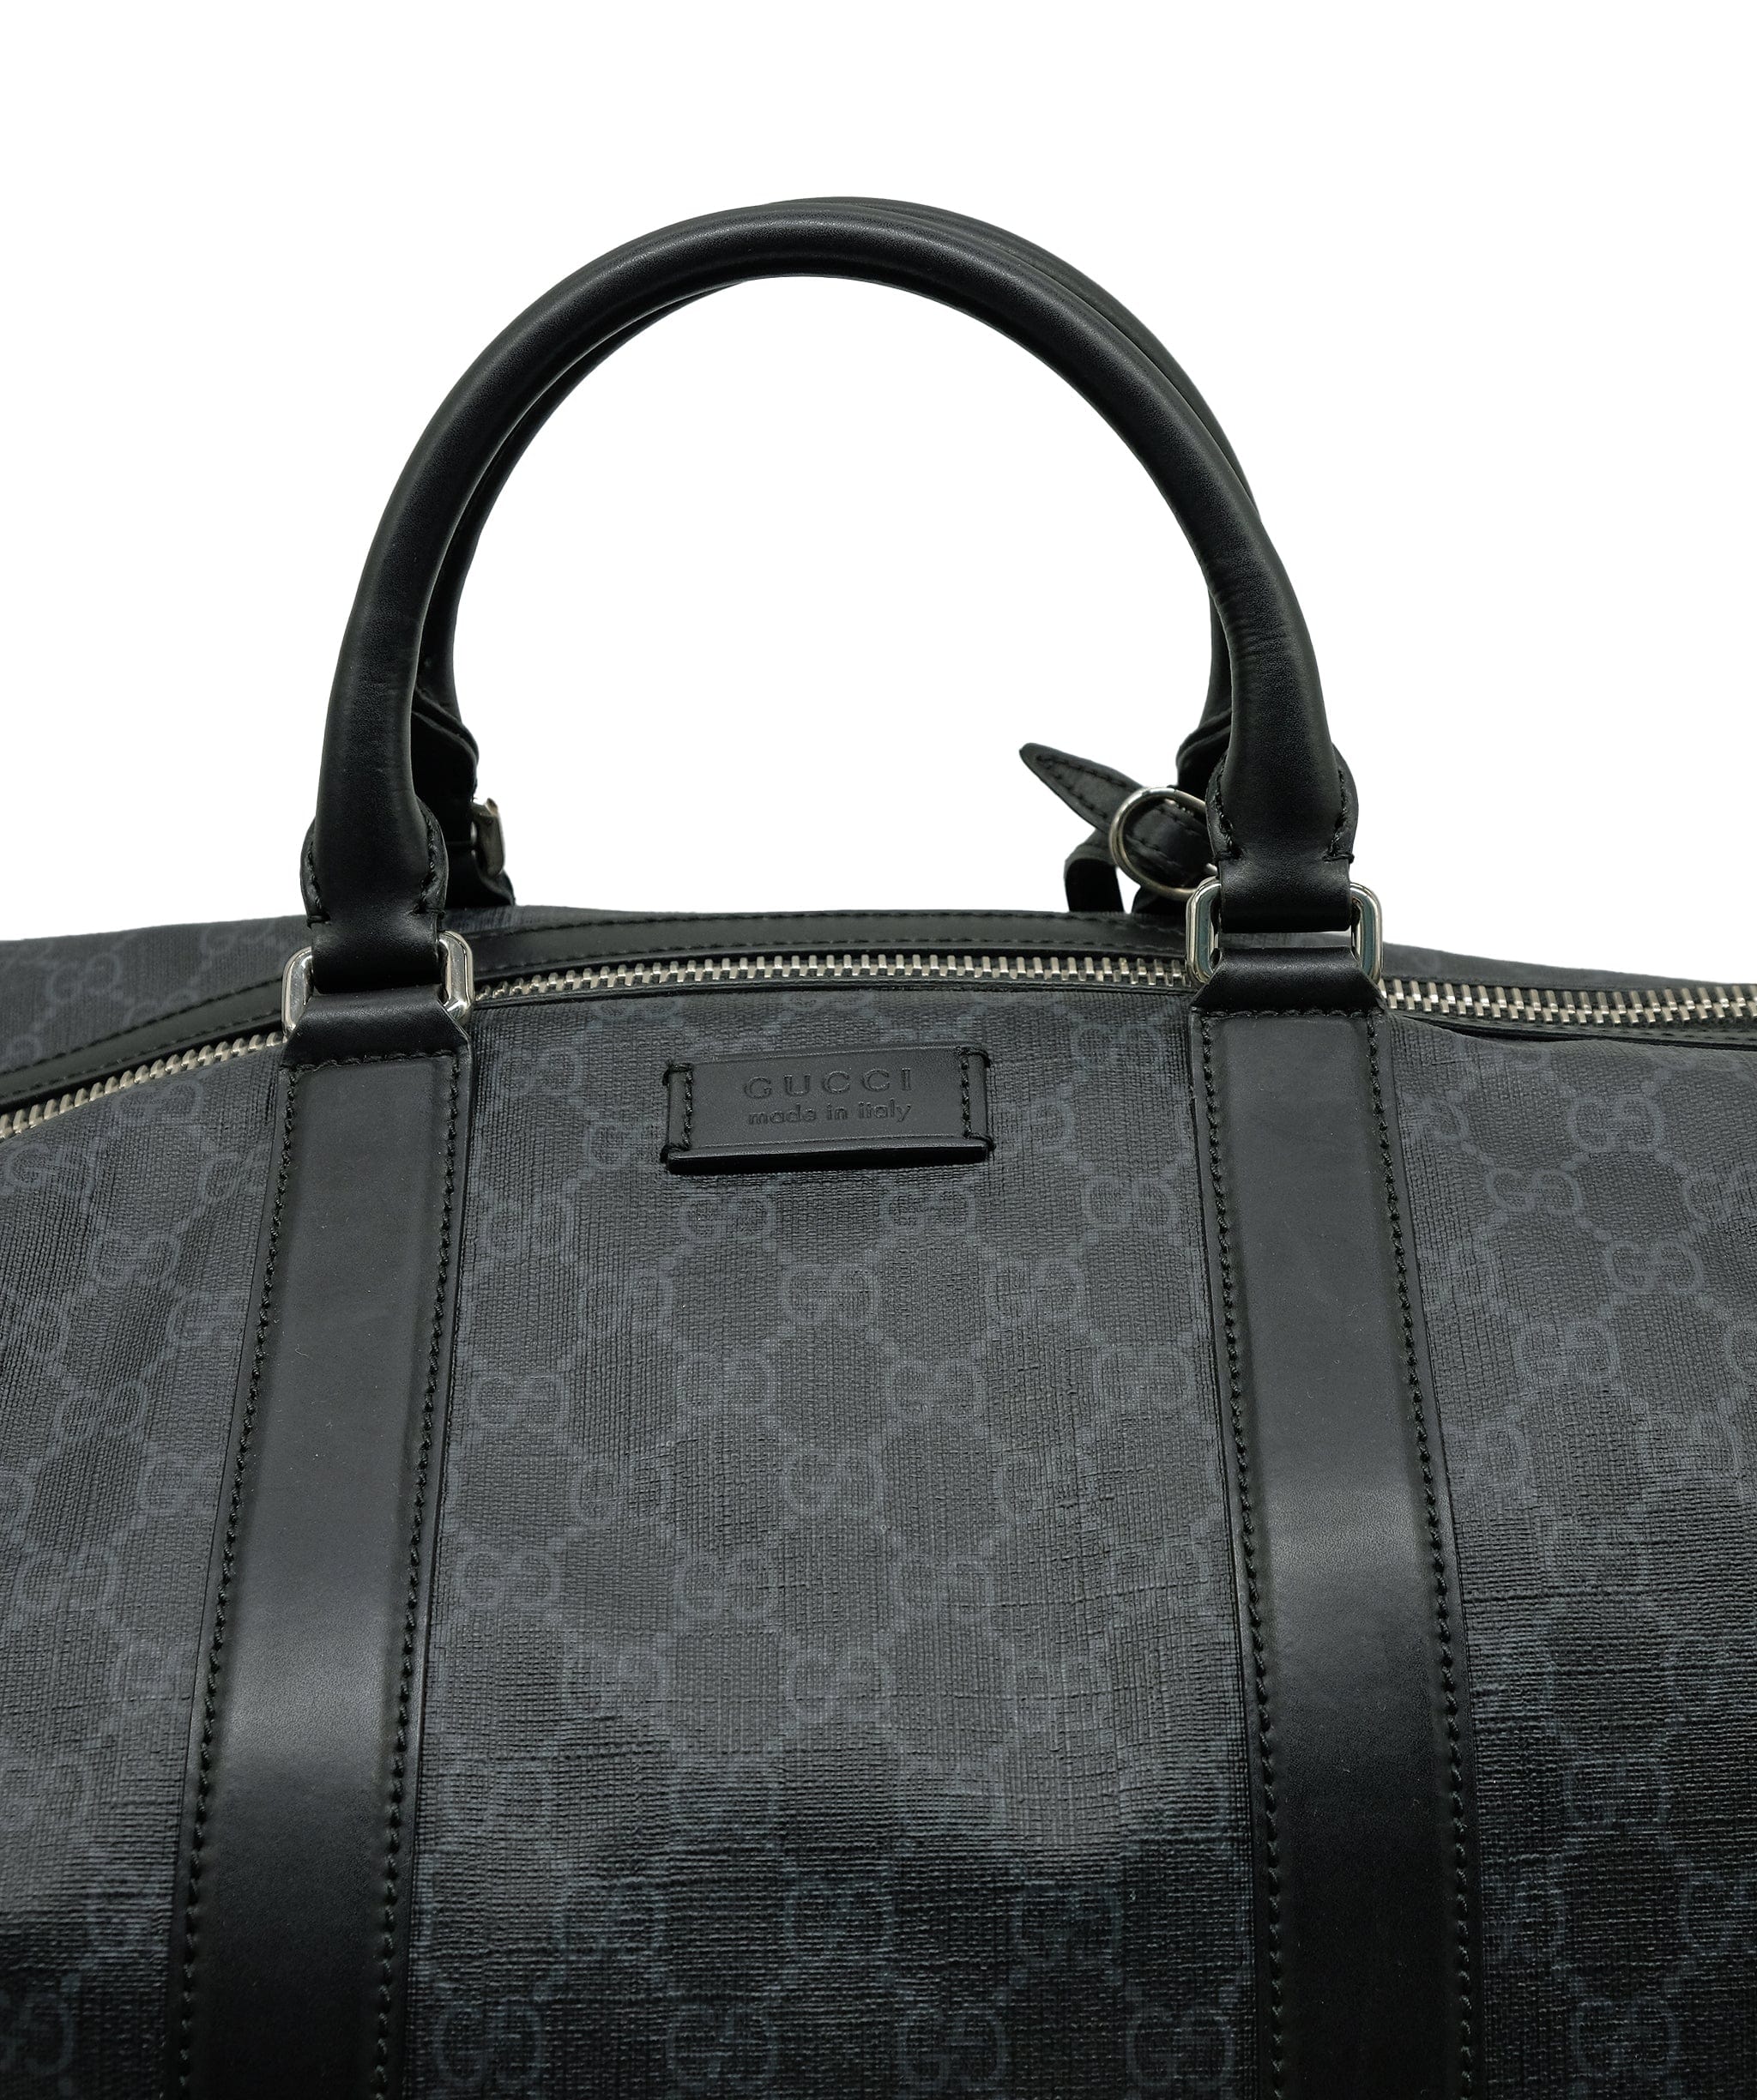 Gucci Gucci GG BLACK CARRY-ON DUFFLE RJC3164